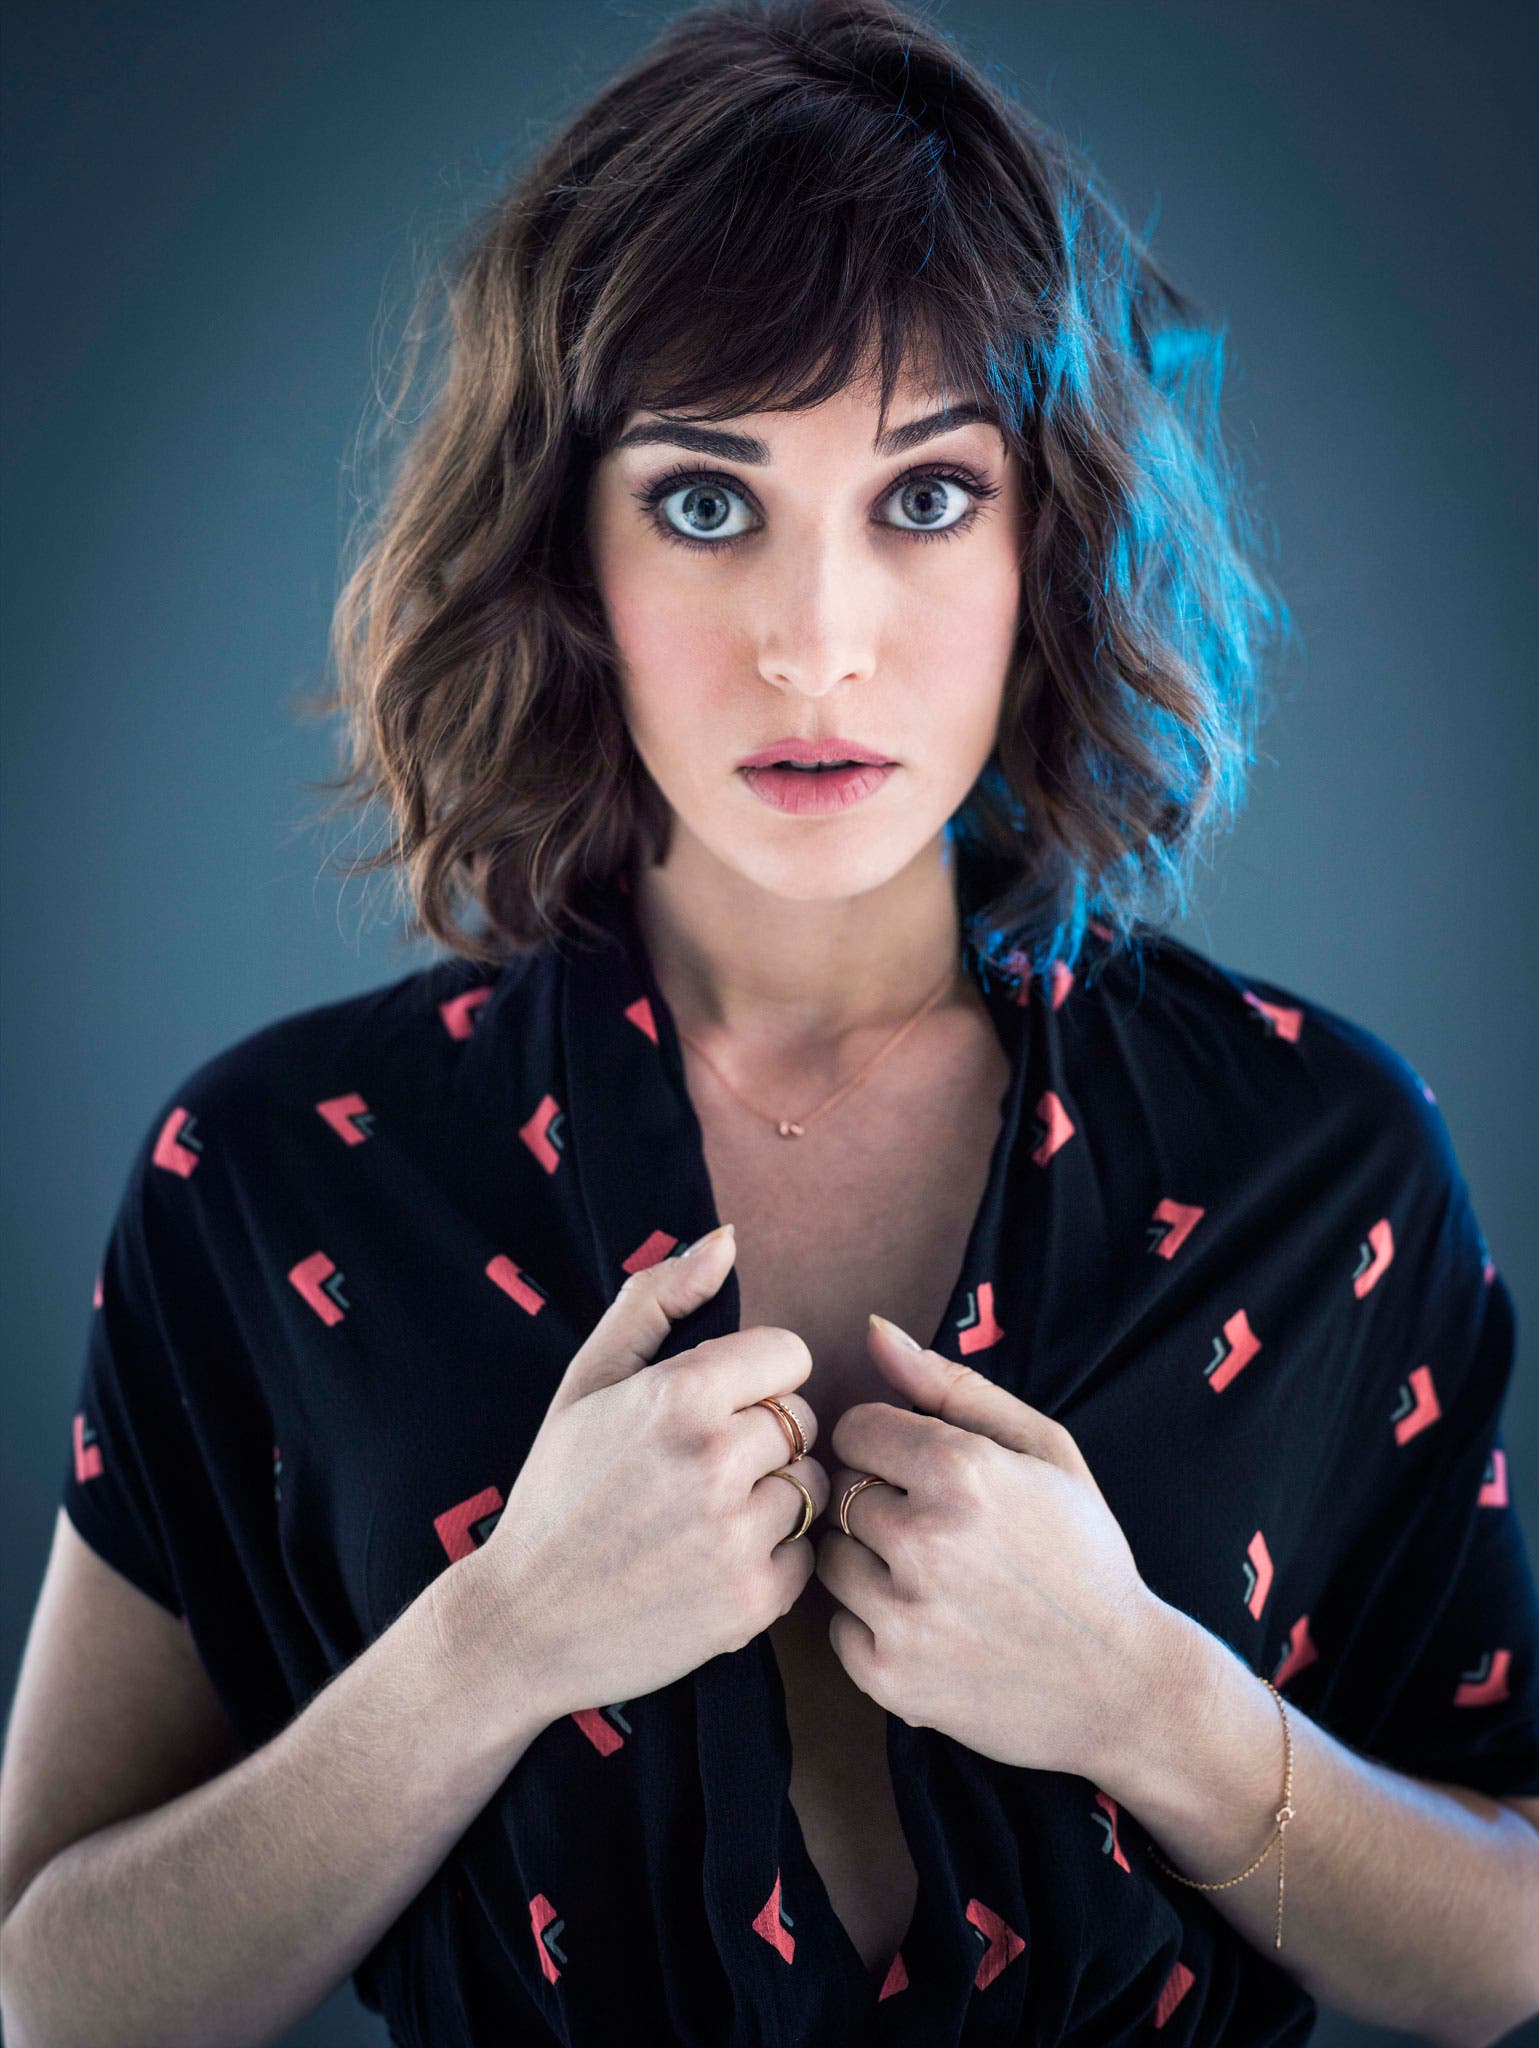 christy crossland share lizzy caplan leaked nudes photos